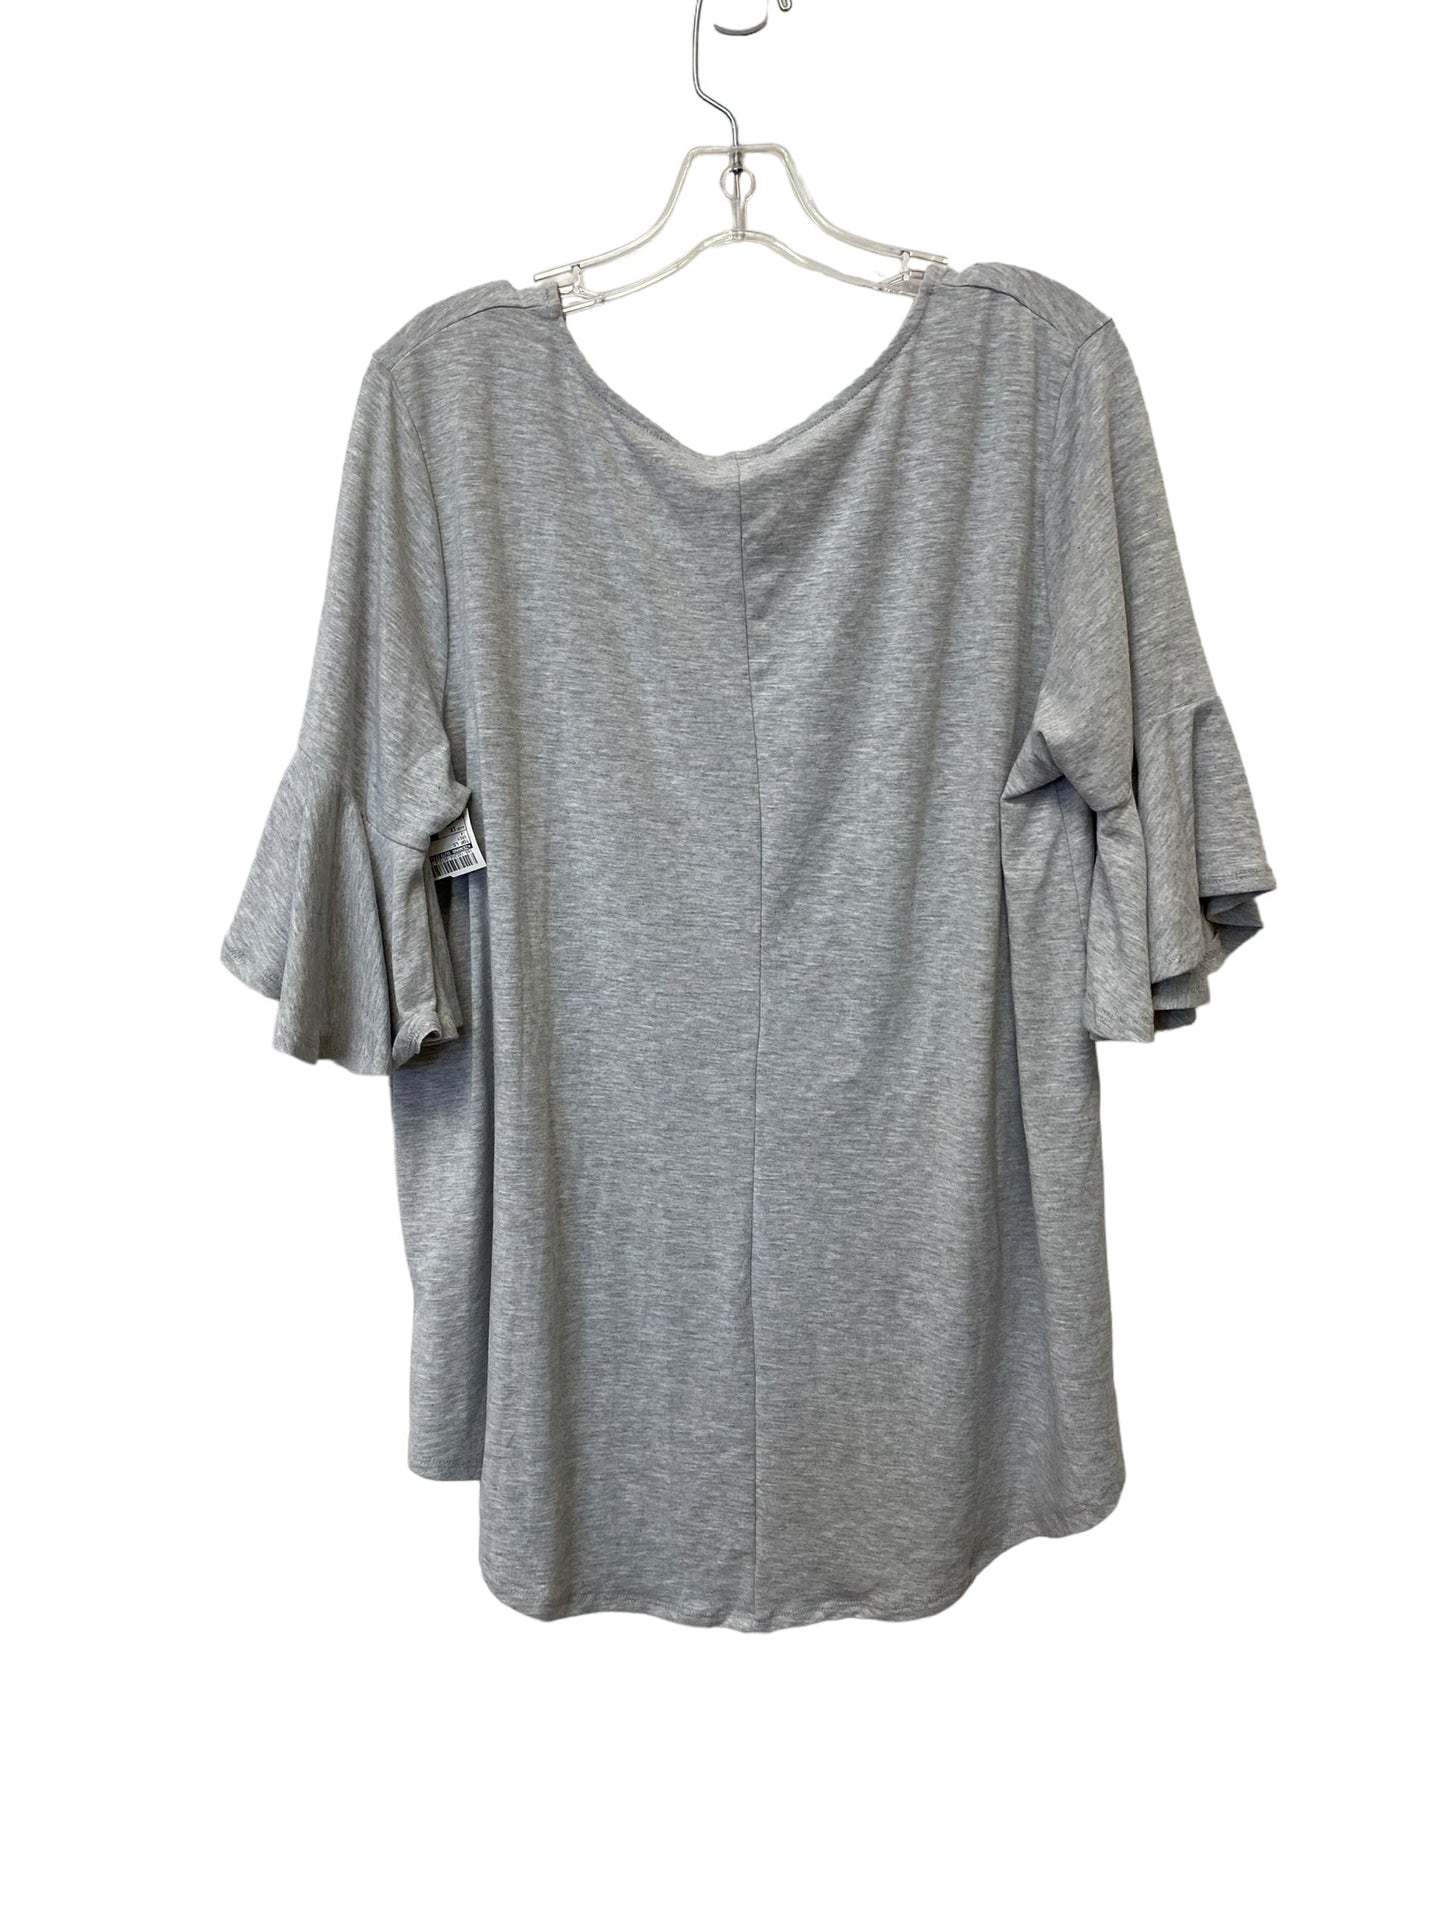 Grey Top Long Sleeve Zenana Outfitters, Size 1x